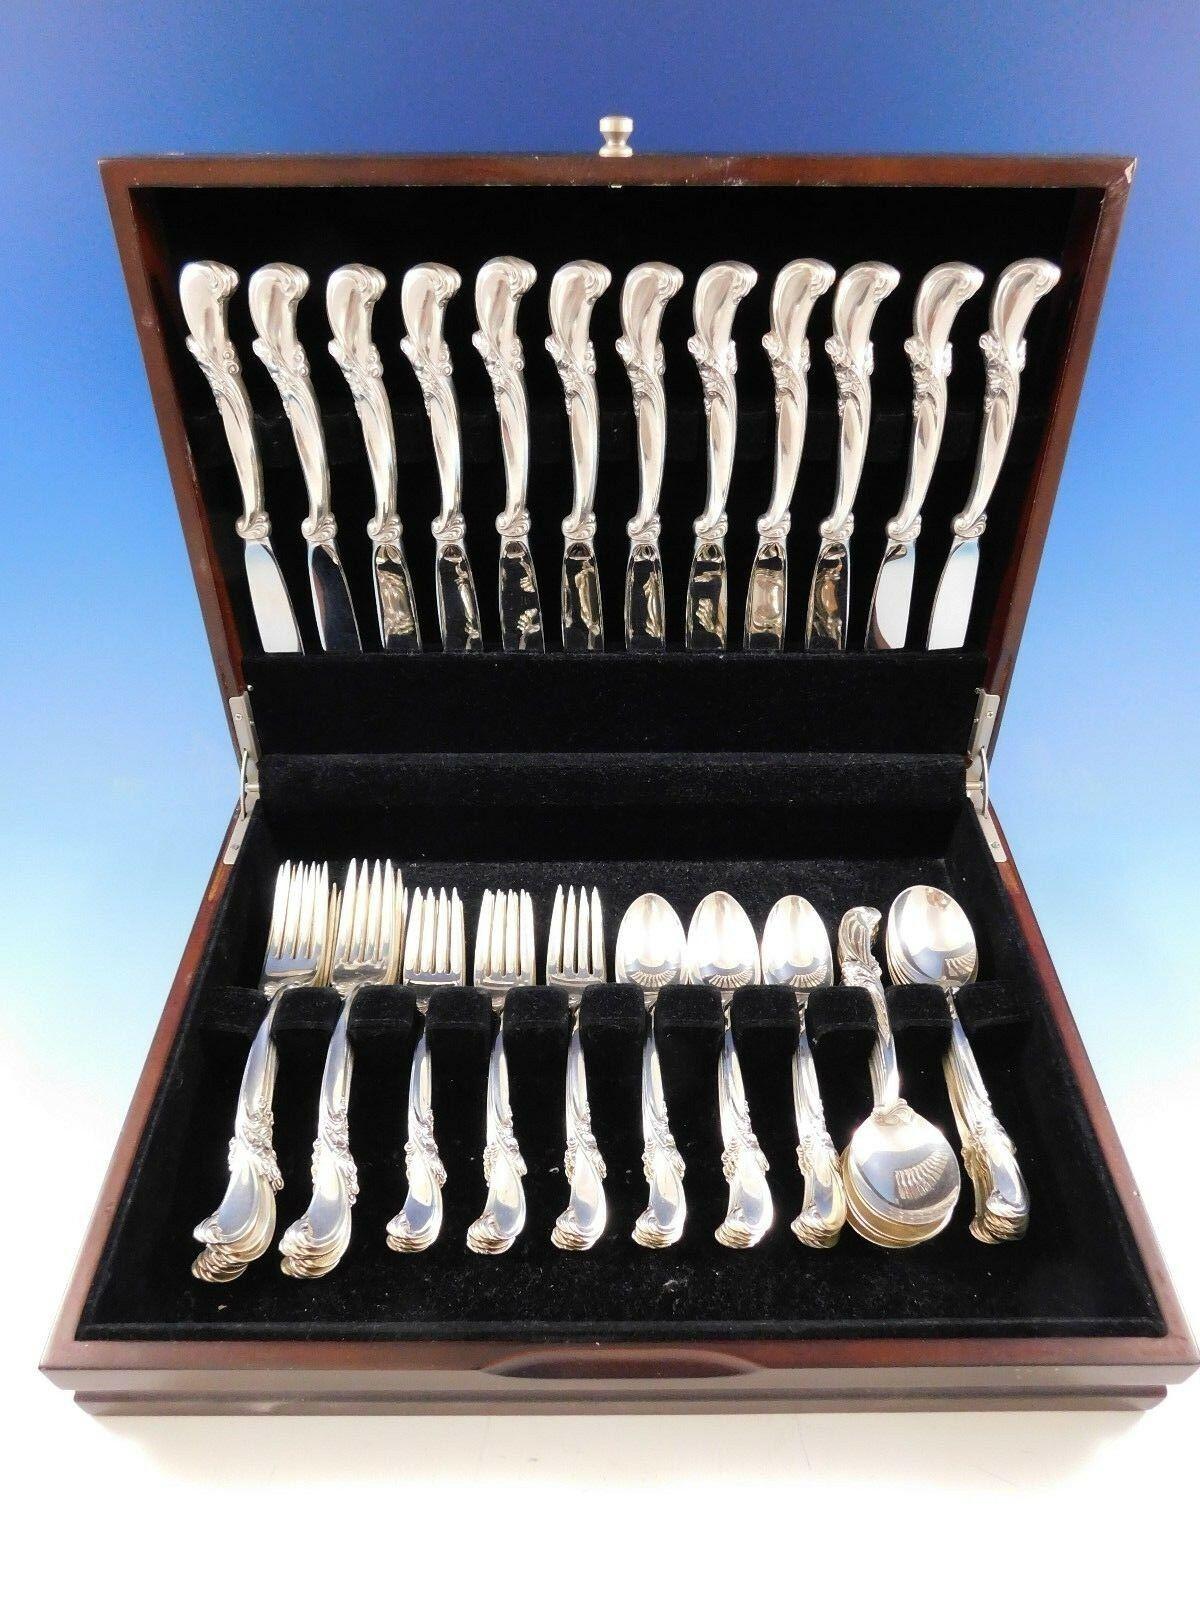 Lovely Waltz of Spring by Wallace sterling silver flatware set, 60 pieces. This set includes:

12 knives, 8 7/8